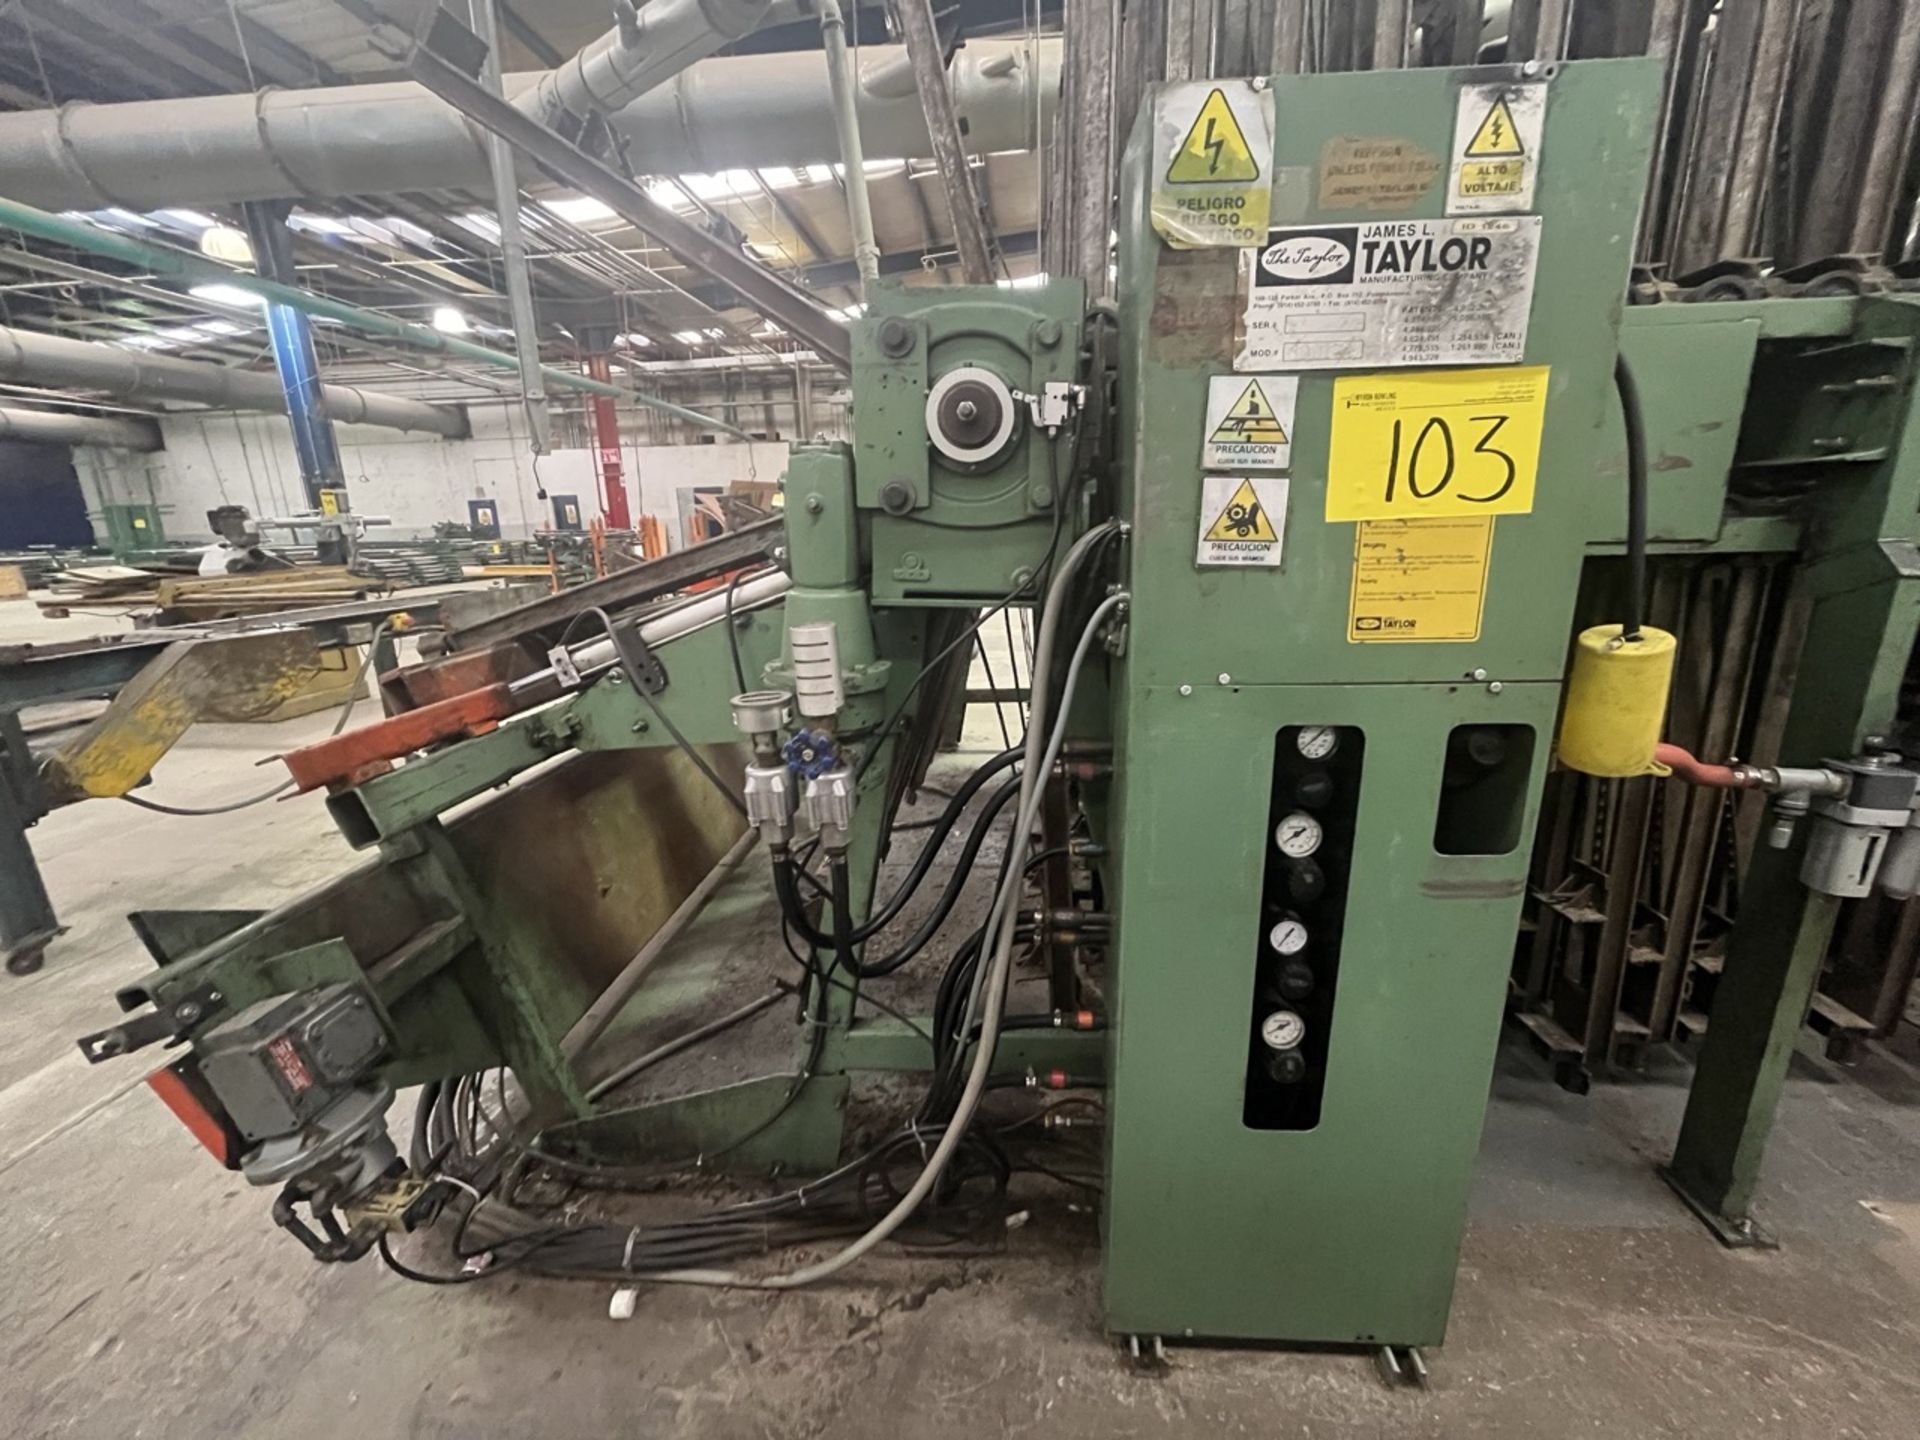 Taylor Octopus clamp holder and molder, Model 800169, Serial No. W493, Includes band to place the g - Image 10 of 12